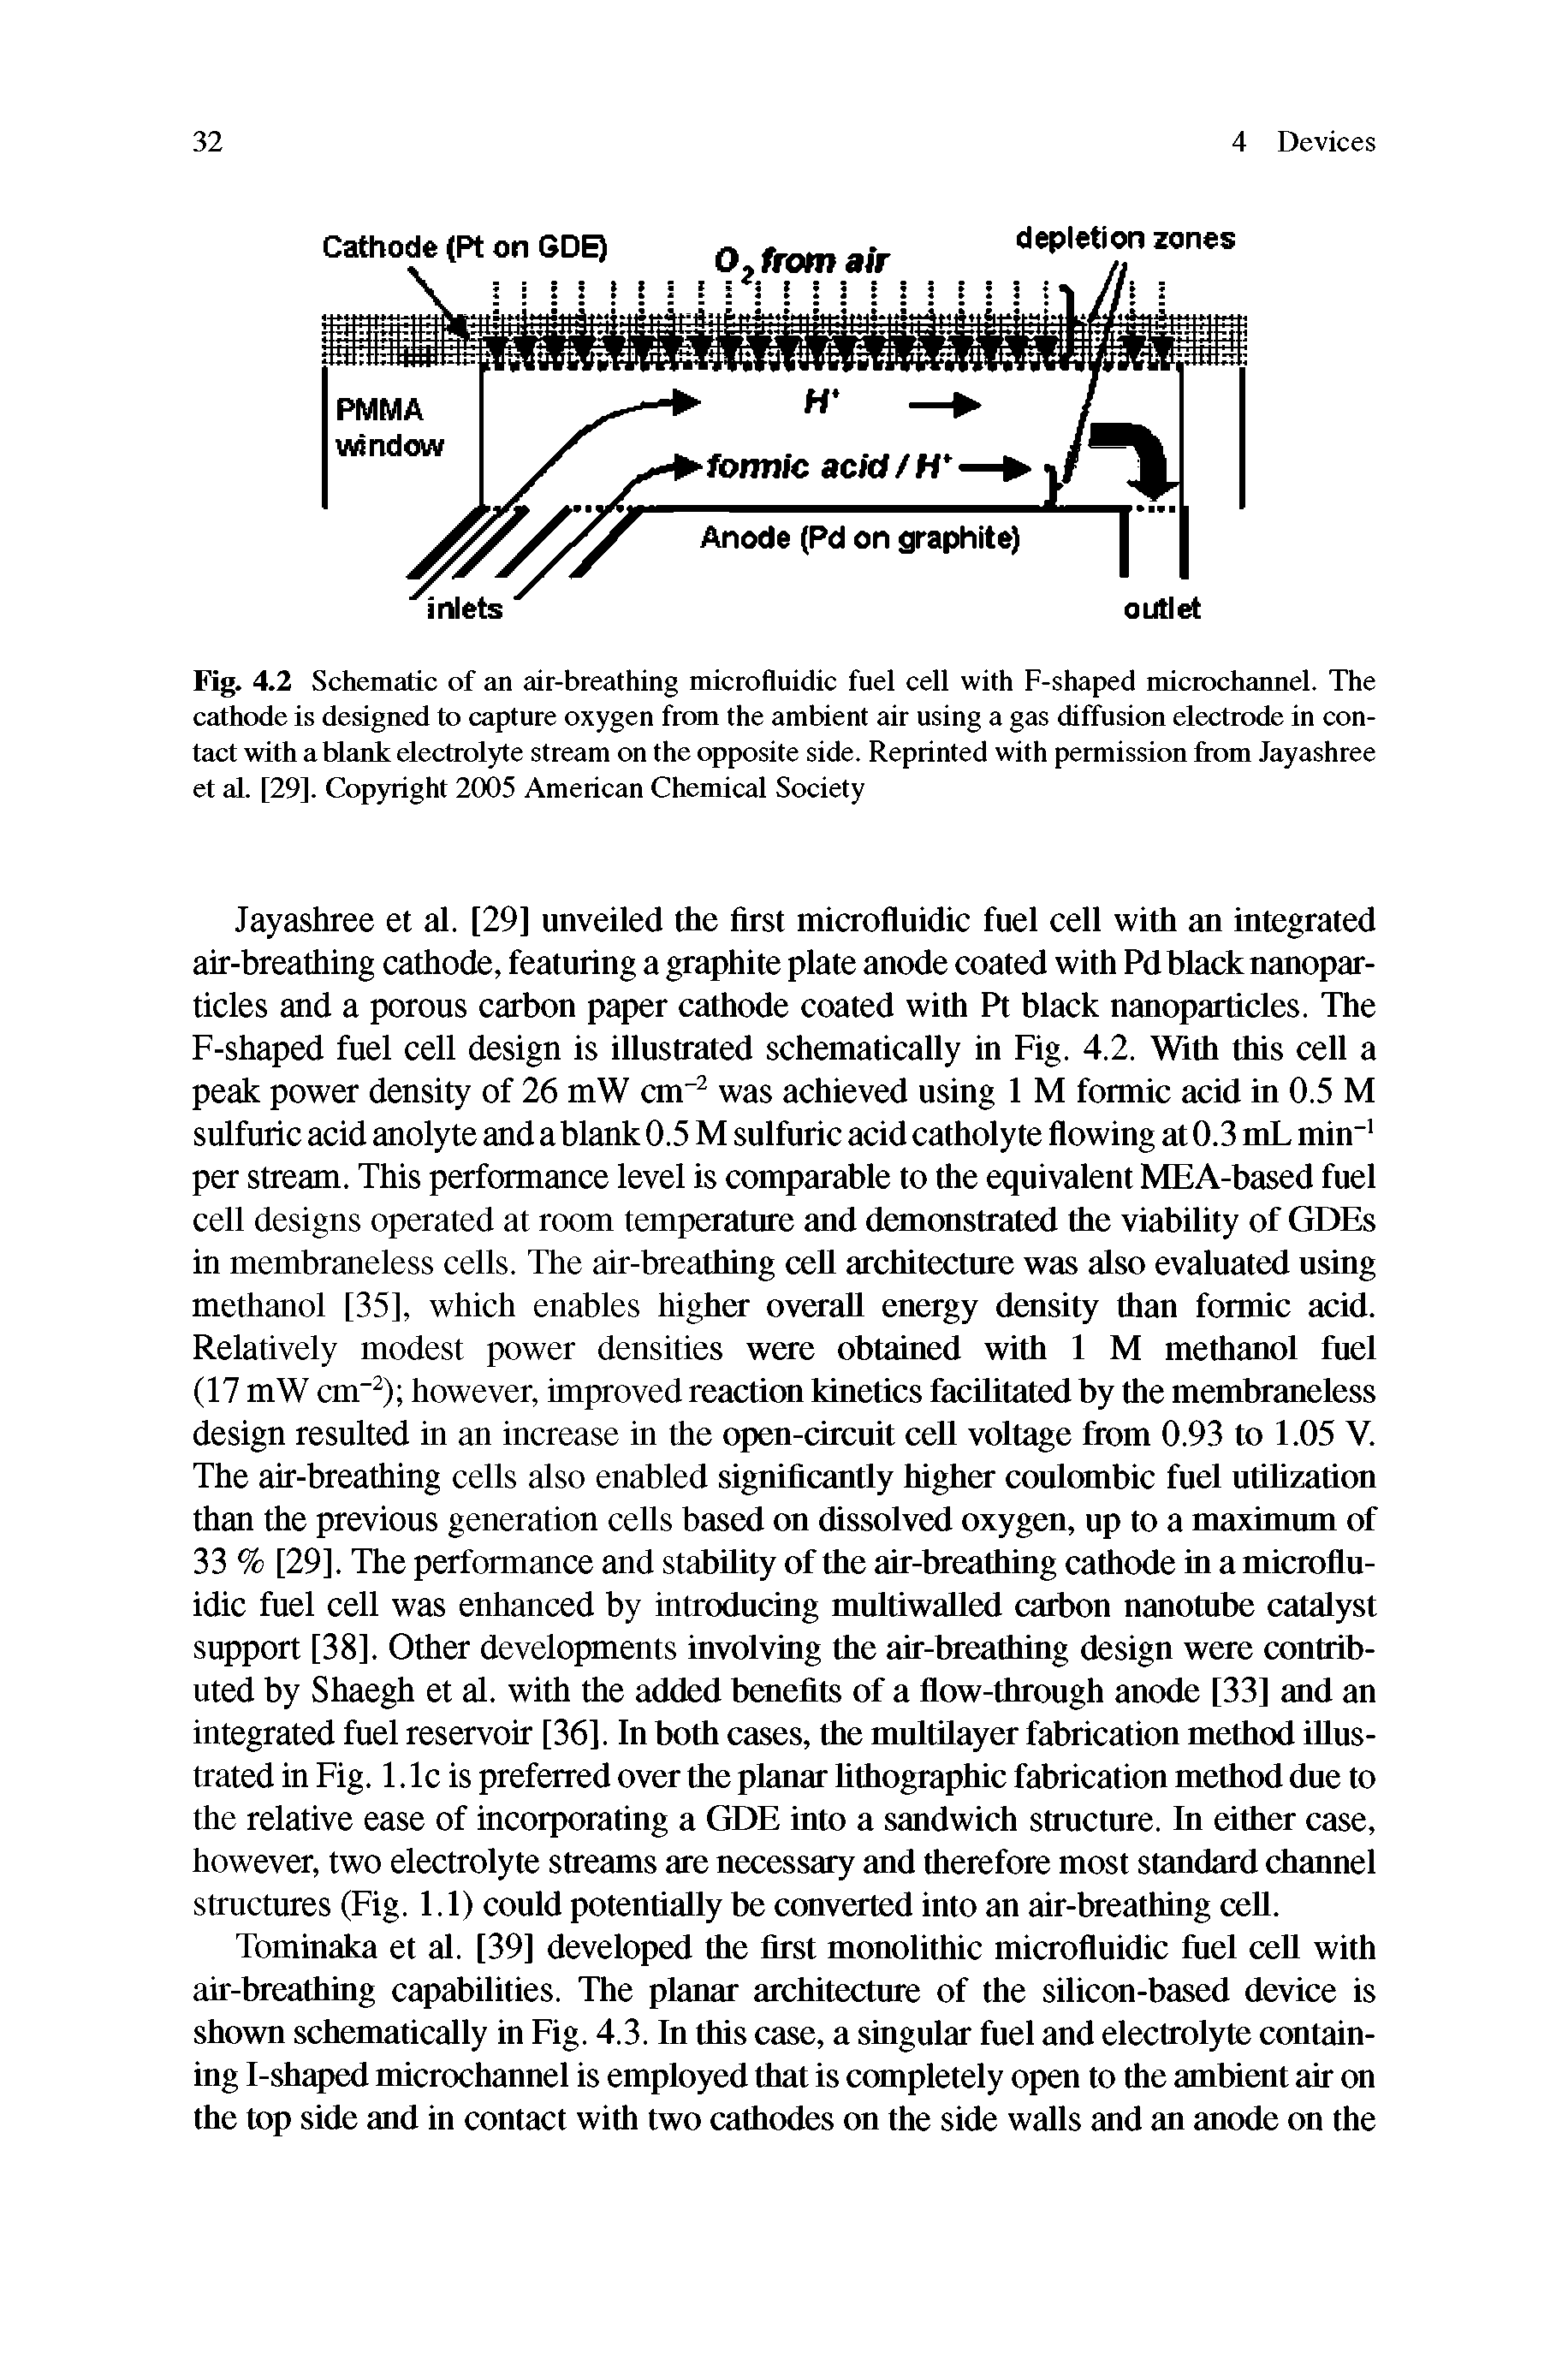 Fig. 4.2 Schematic of an air-breathing microfluidic fuel cell with F-shaped microchannel. The cathode is designed to capture oxygen from the ambient air using a gas diffusion electrode in contact with a blank electrolyte stream on the opposite side. Reprinted with permission from Jayashree et aL [29]. Copyright 2005 American Chemiceil Society...